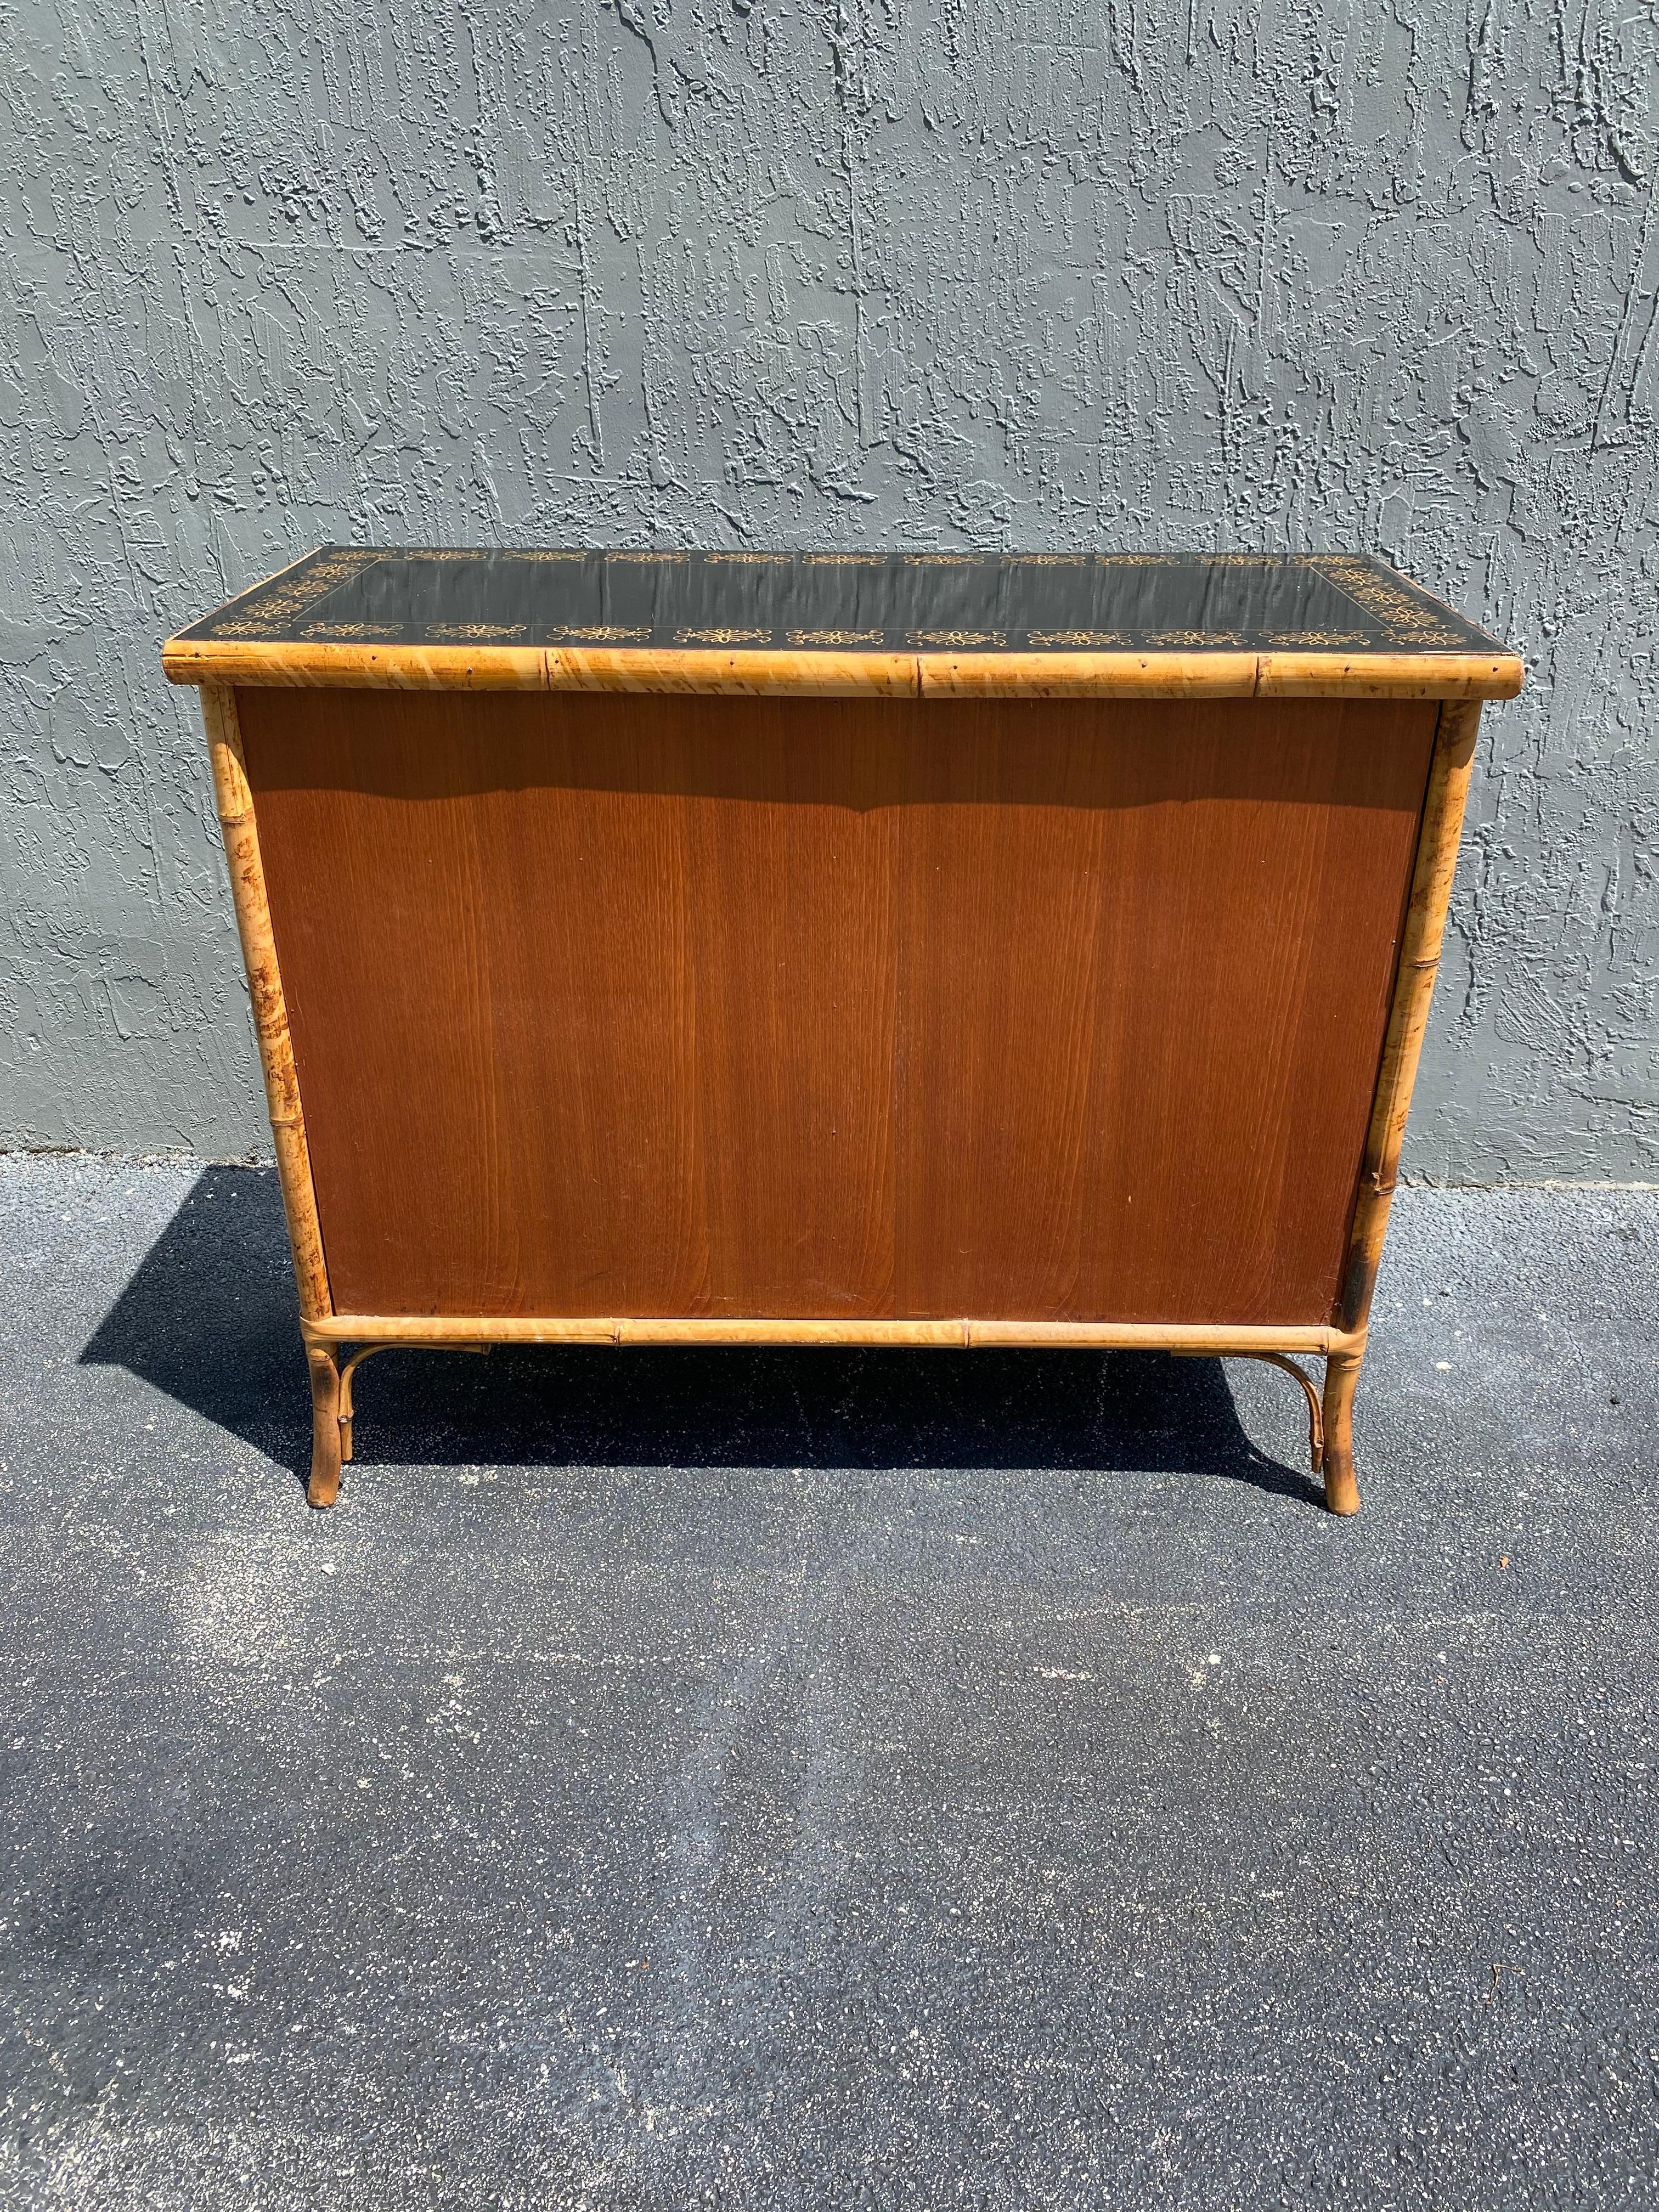 1920s Rattan Chinoiserie Hand Painted Cabinet Mini Sideboard 6